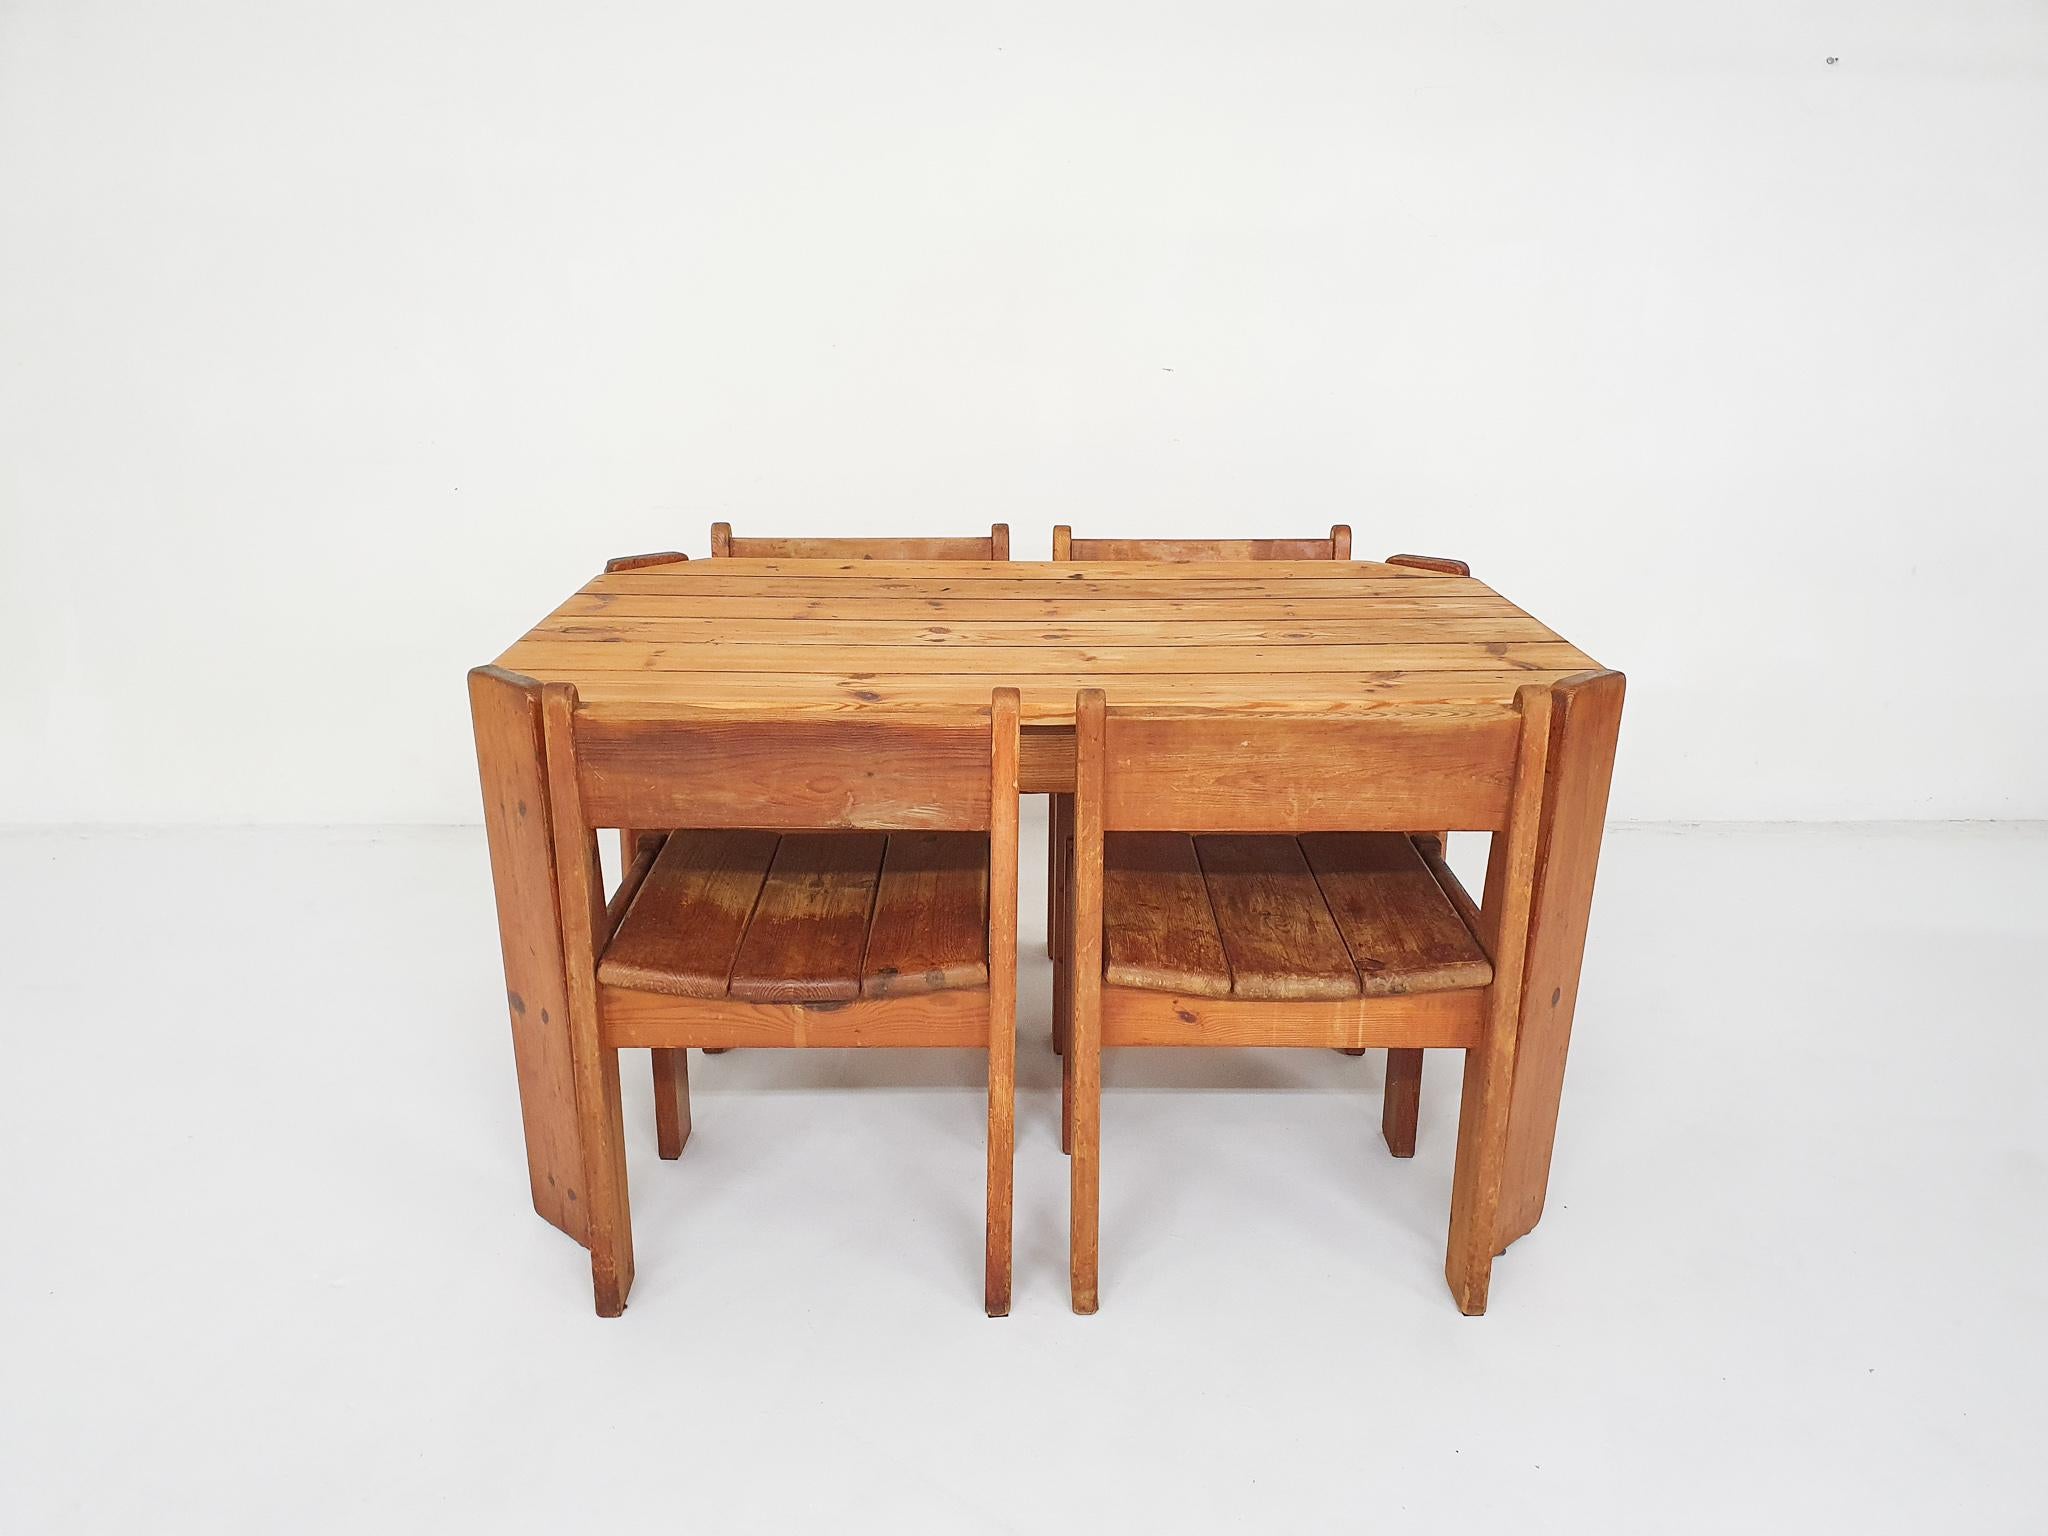 Pinewood dining table attrb. to Ate van Apeldoorn, The Netherlands 1970's For Sale 4